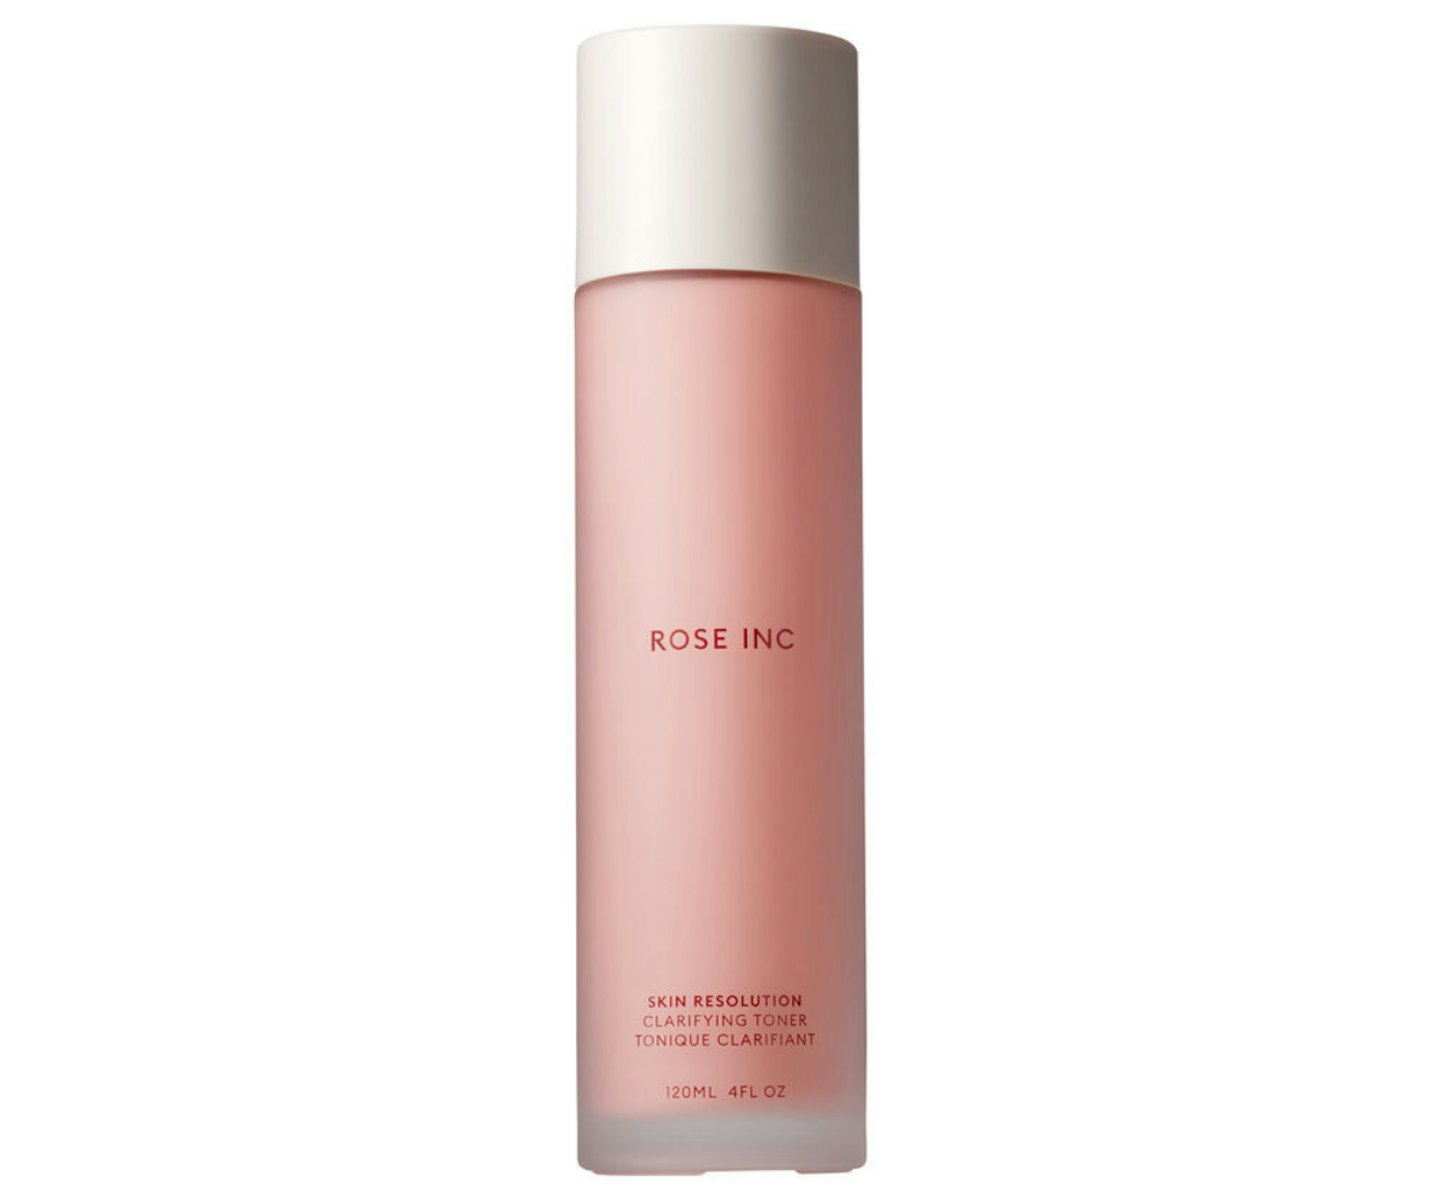 A picture of the Rose Inc Skin Resolution Clarifying Toner